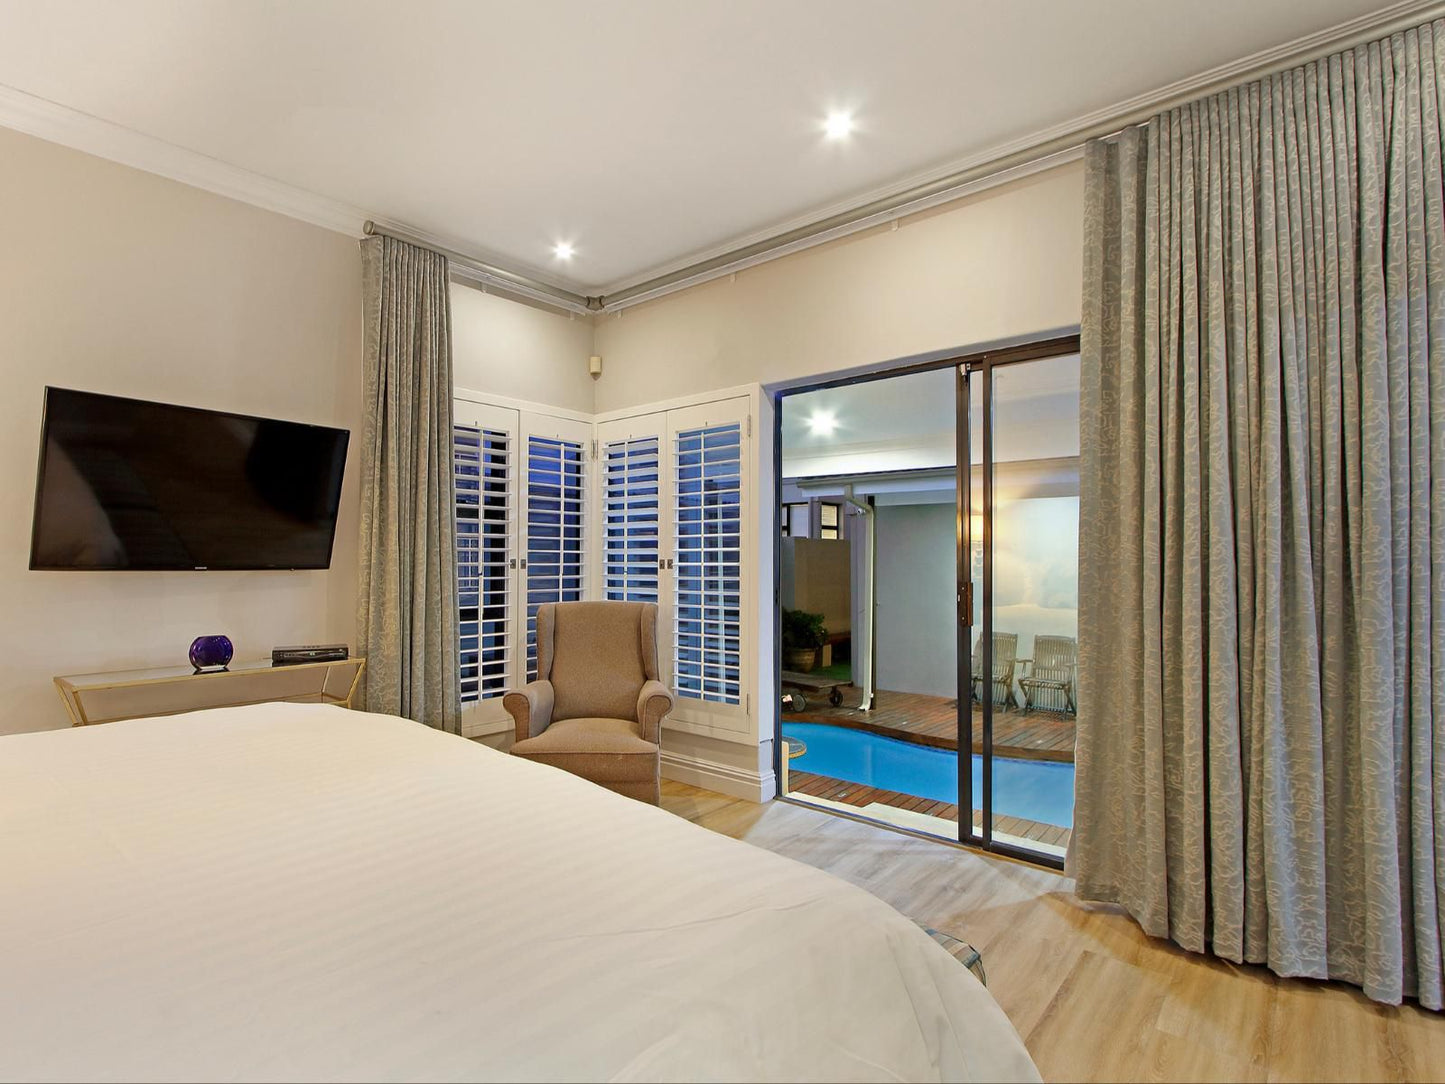 Villa Balmoral 14 By Hostagents West Beach Blouberg Western Cape South Africa Bedroom